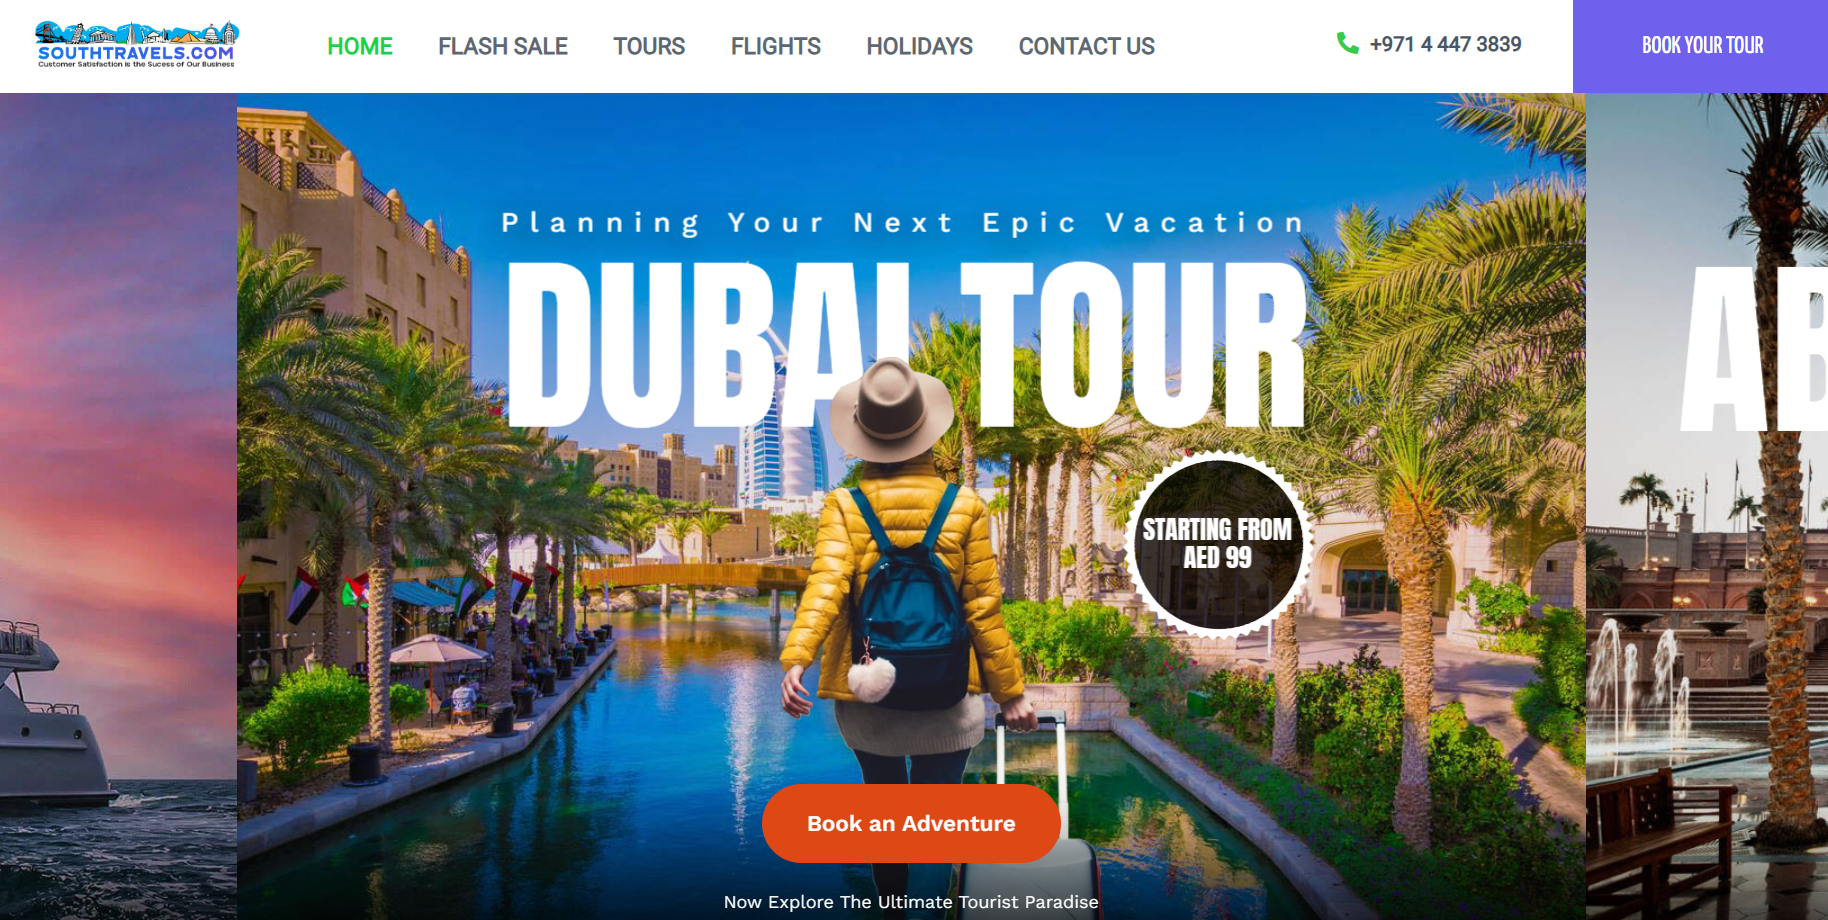 Tours.SouthTravels Travel Service providers in UAE